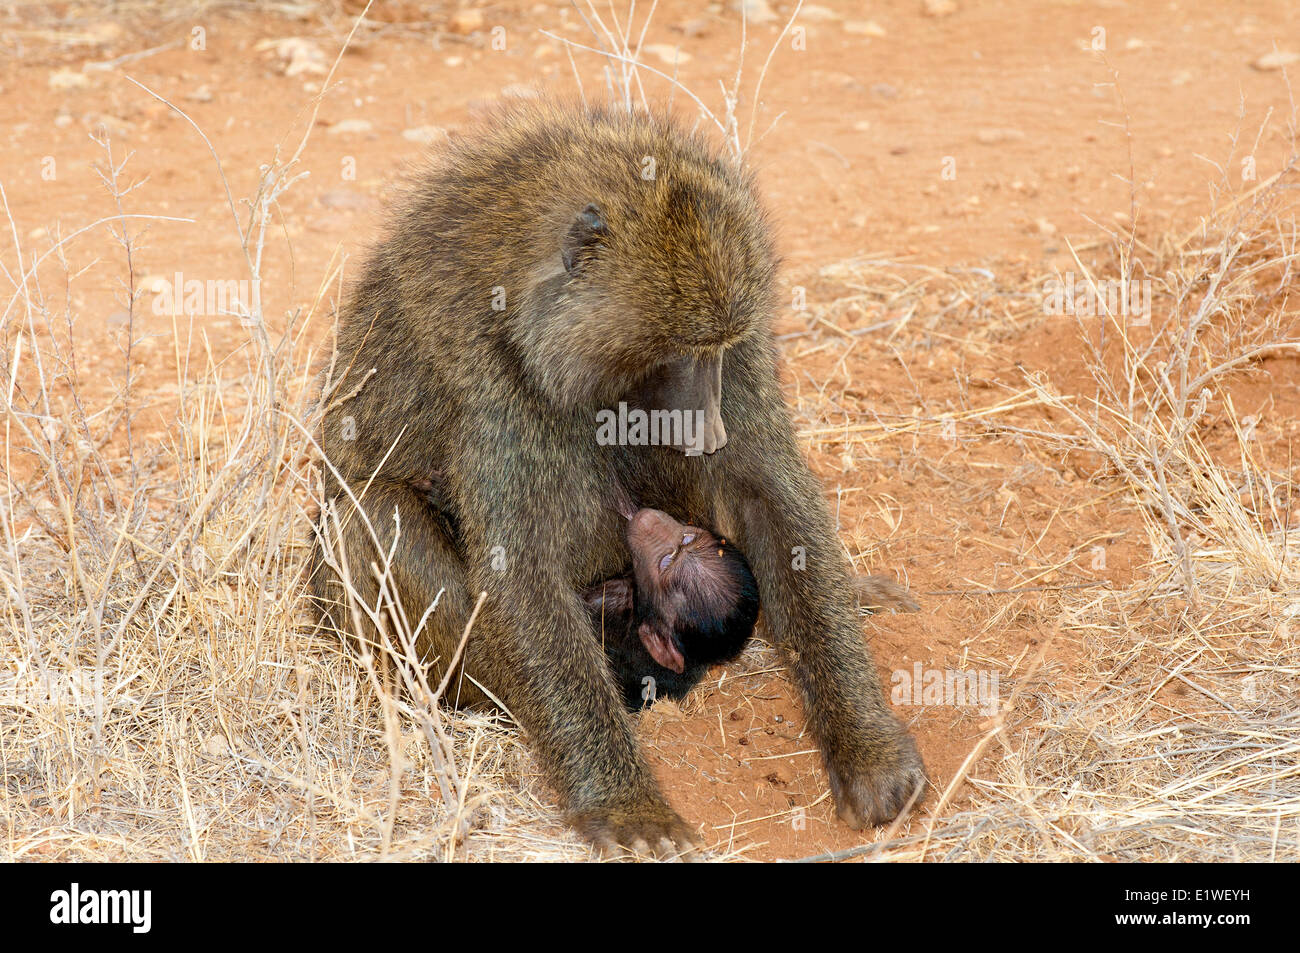 Olive baboon (papio anubis) nursing while its mother forages, Kenya, East Africa Stock Photo